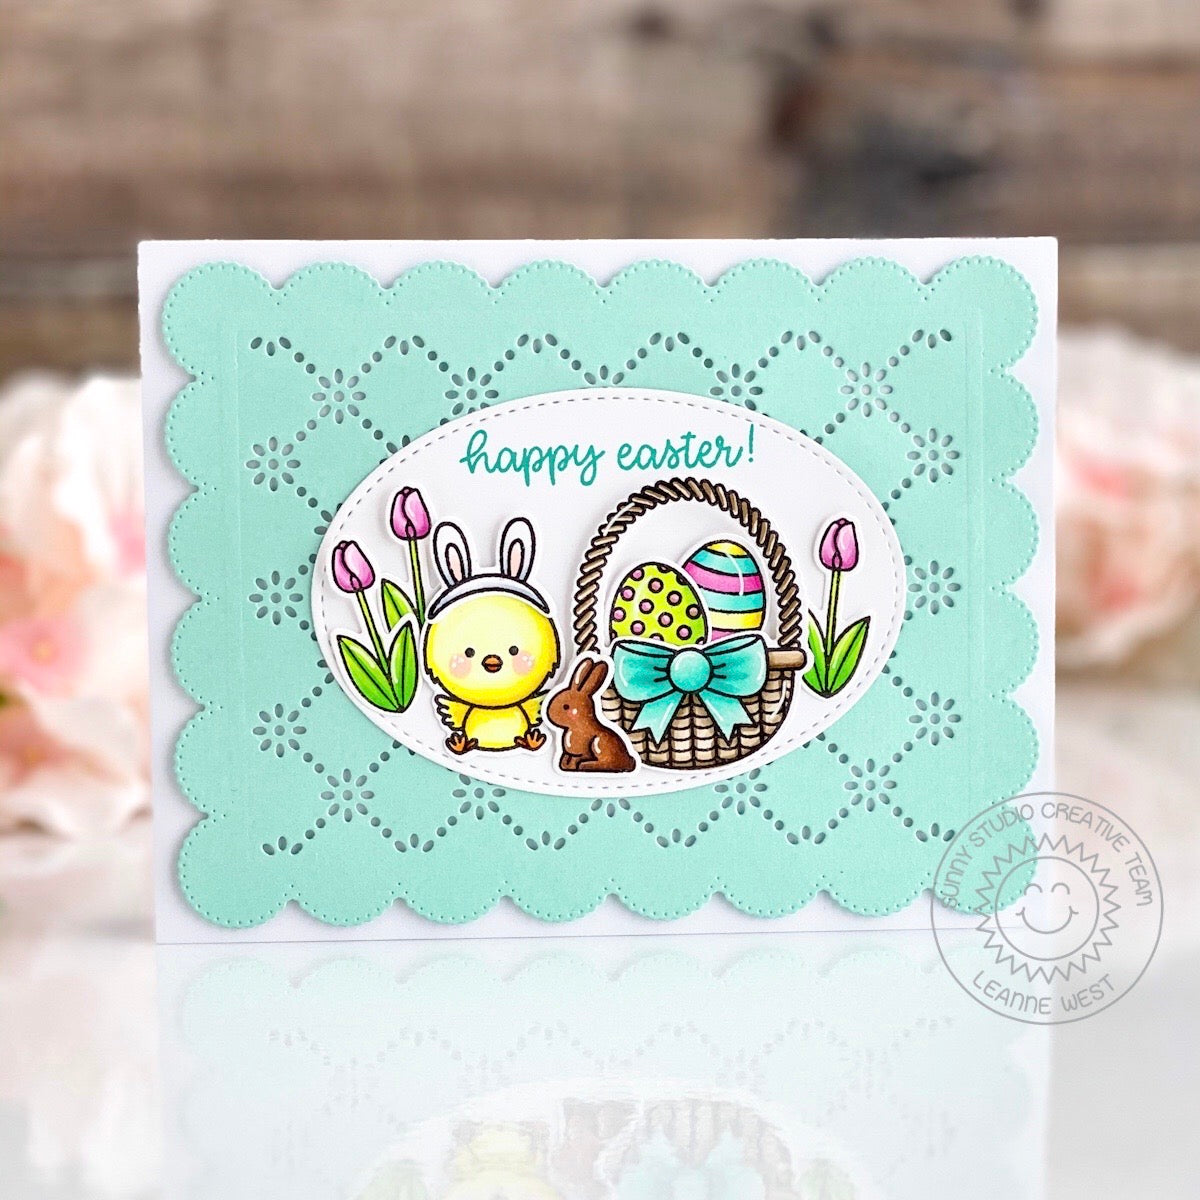 Sunny Studio Stamps Happy Easter Chick with Basket, Eggs & Chocolate Bunny Card using Frilly Frames Eyelet Lace Cutting Dies